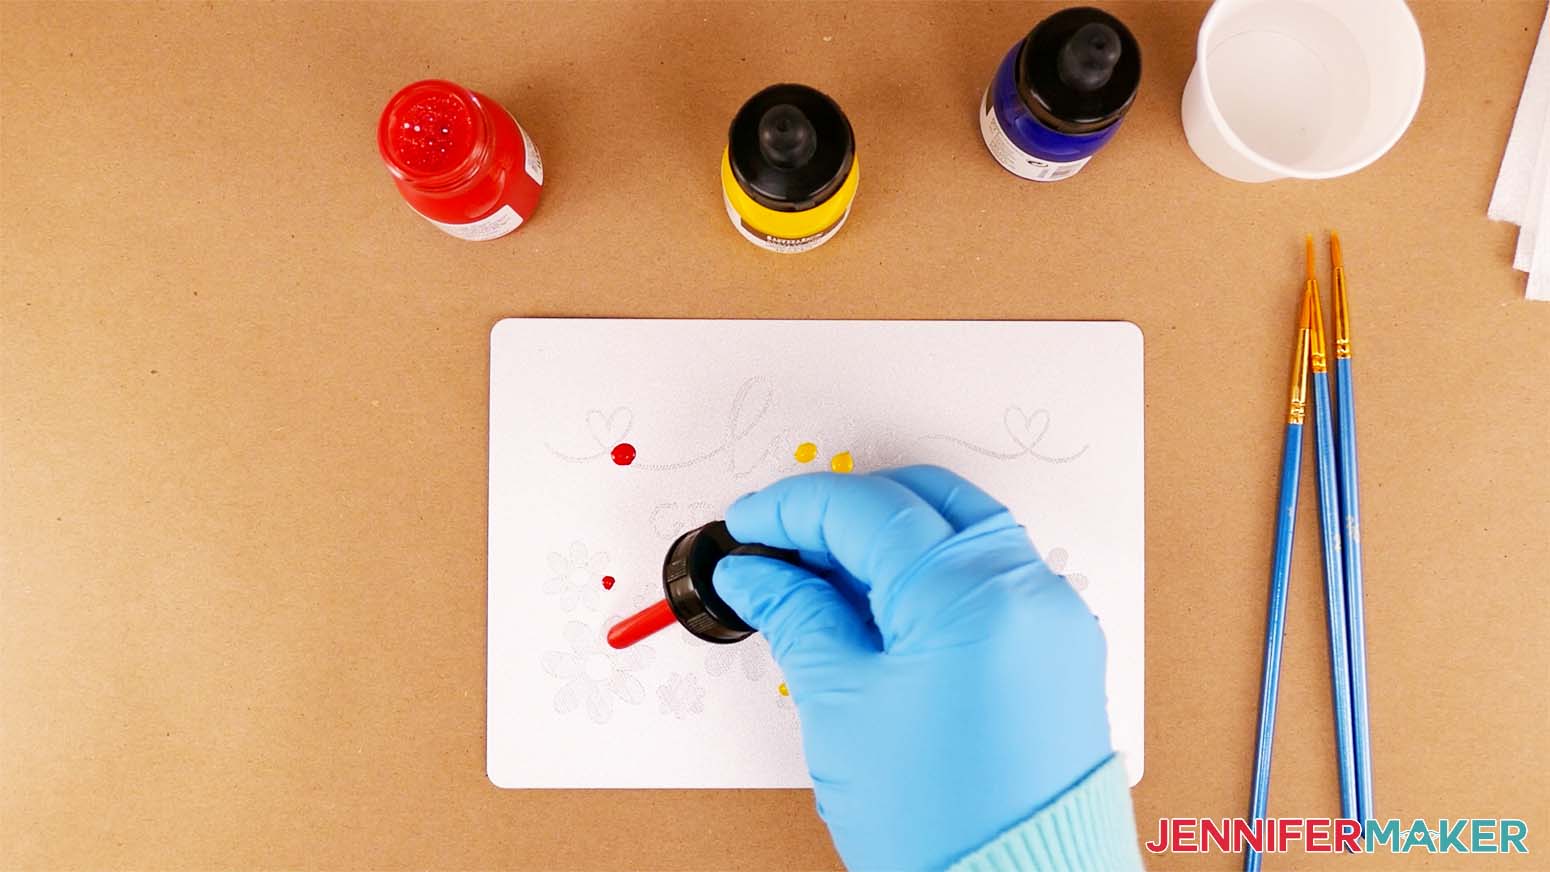 Apply red and yellow drops of acrylic ink to your engraved design so they can be blended with a paint brush